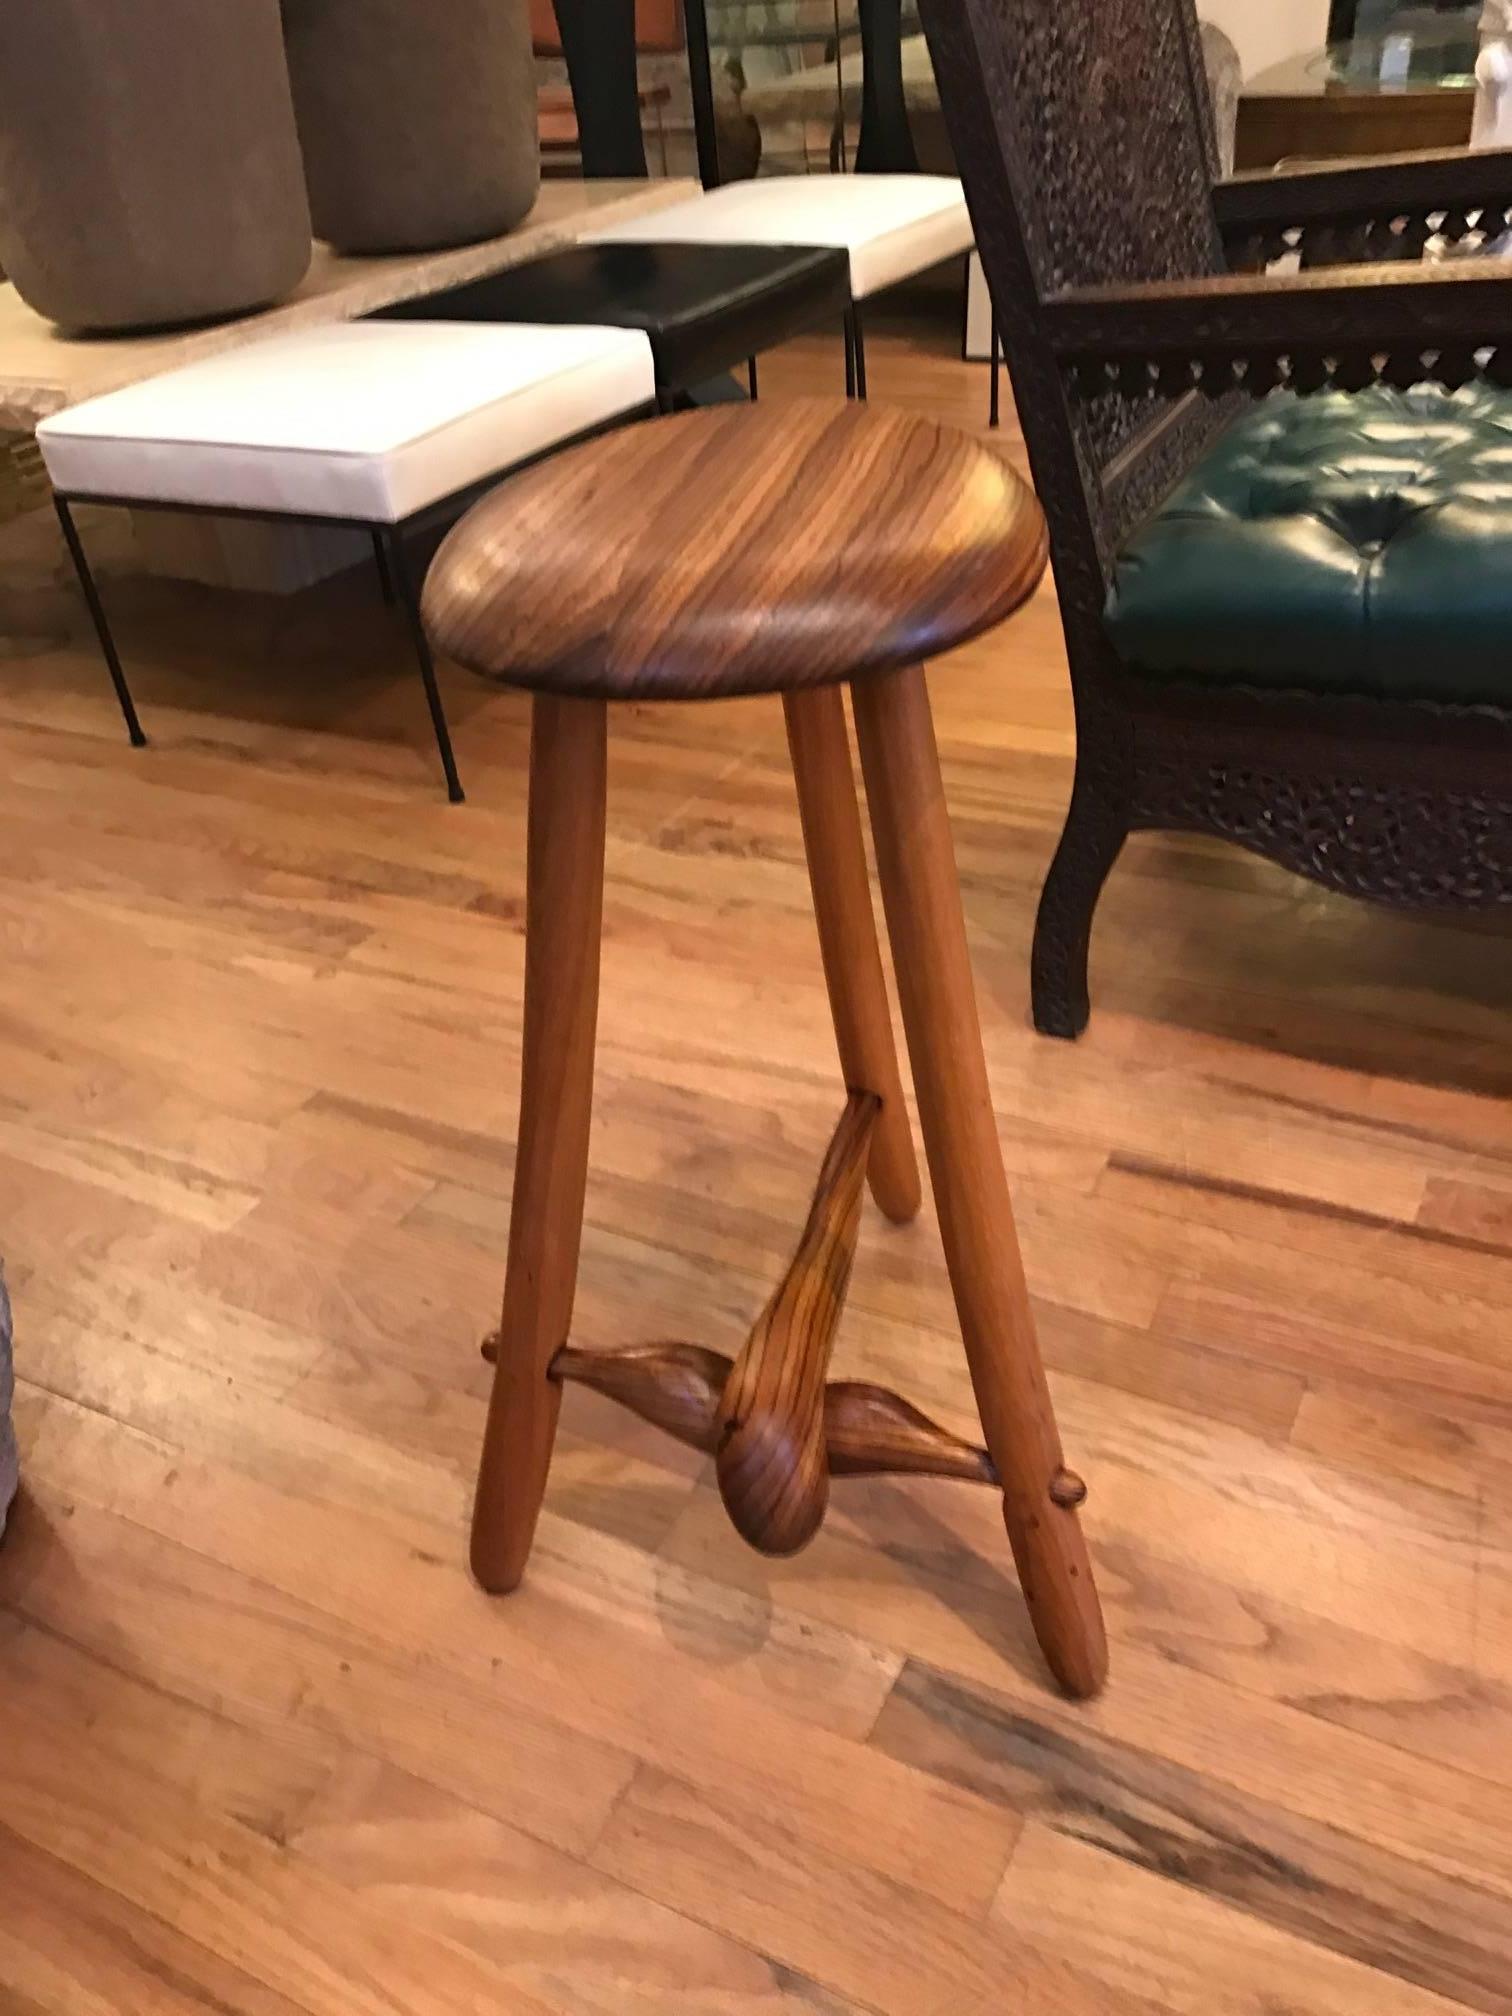 Walnut stool in the manner of Wendall Castle or Phillip Lloyd Powell. The richly grained seat is supported by three legs connected with bulbous nicely grained stretchers. Excellent original finish. Stamped Spiro 1985.